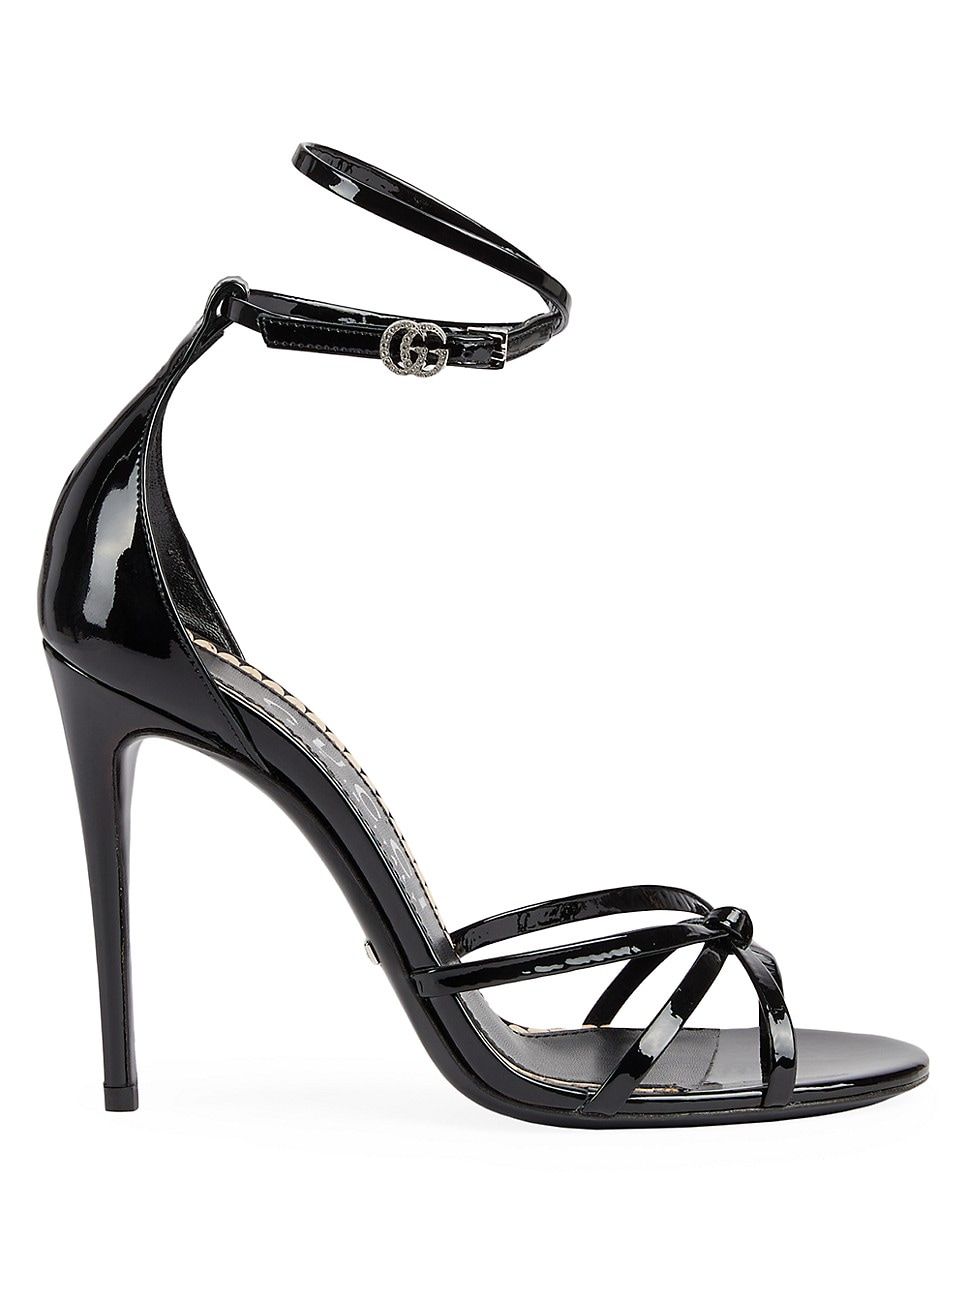 Gucci


Ilse Patent Leather Stiletto Sandals



5 out of 5 Customer Rating | Saks Fifth Avenue